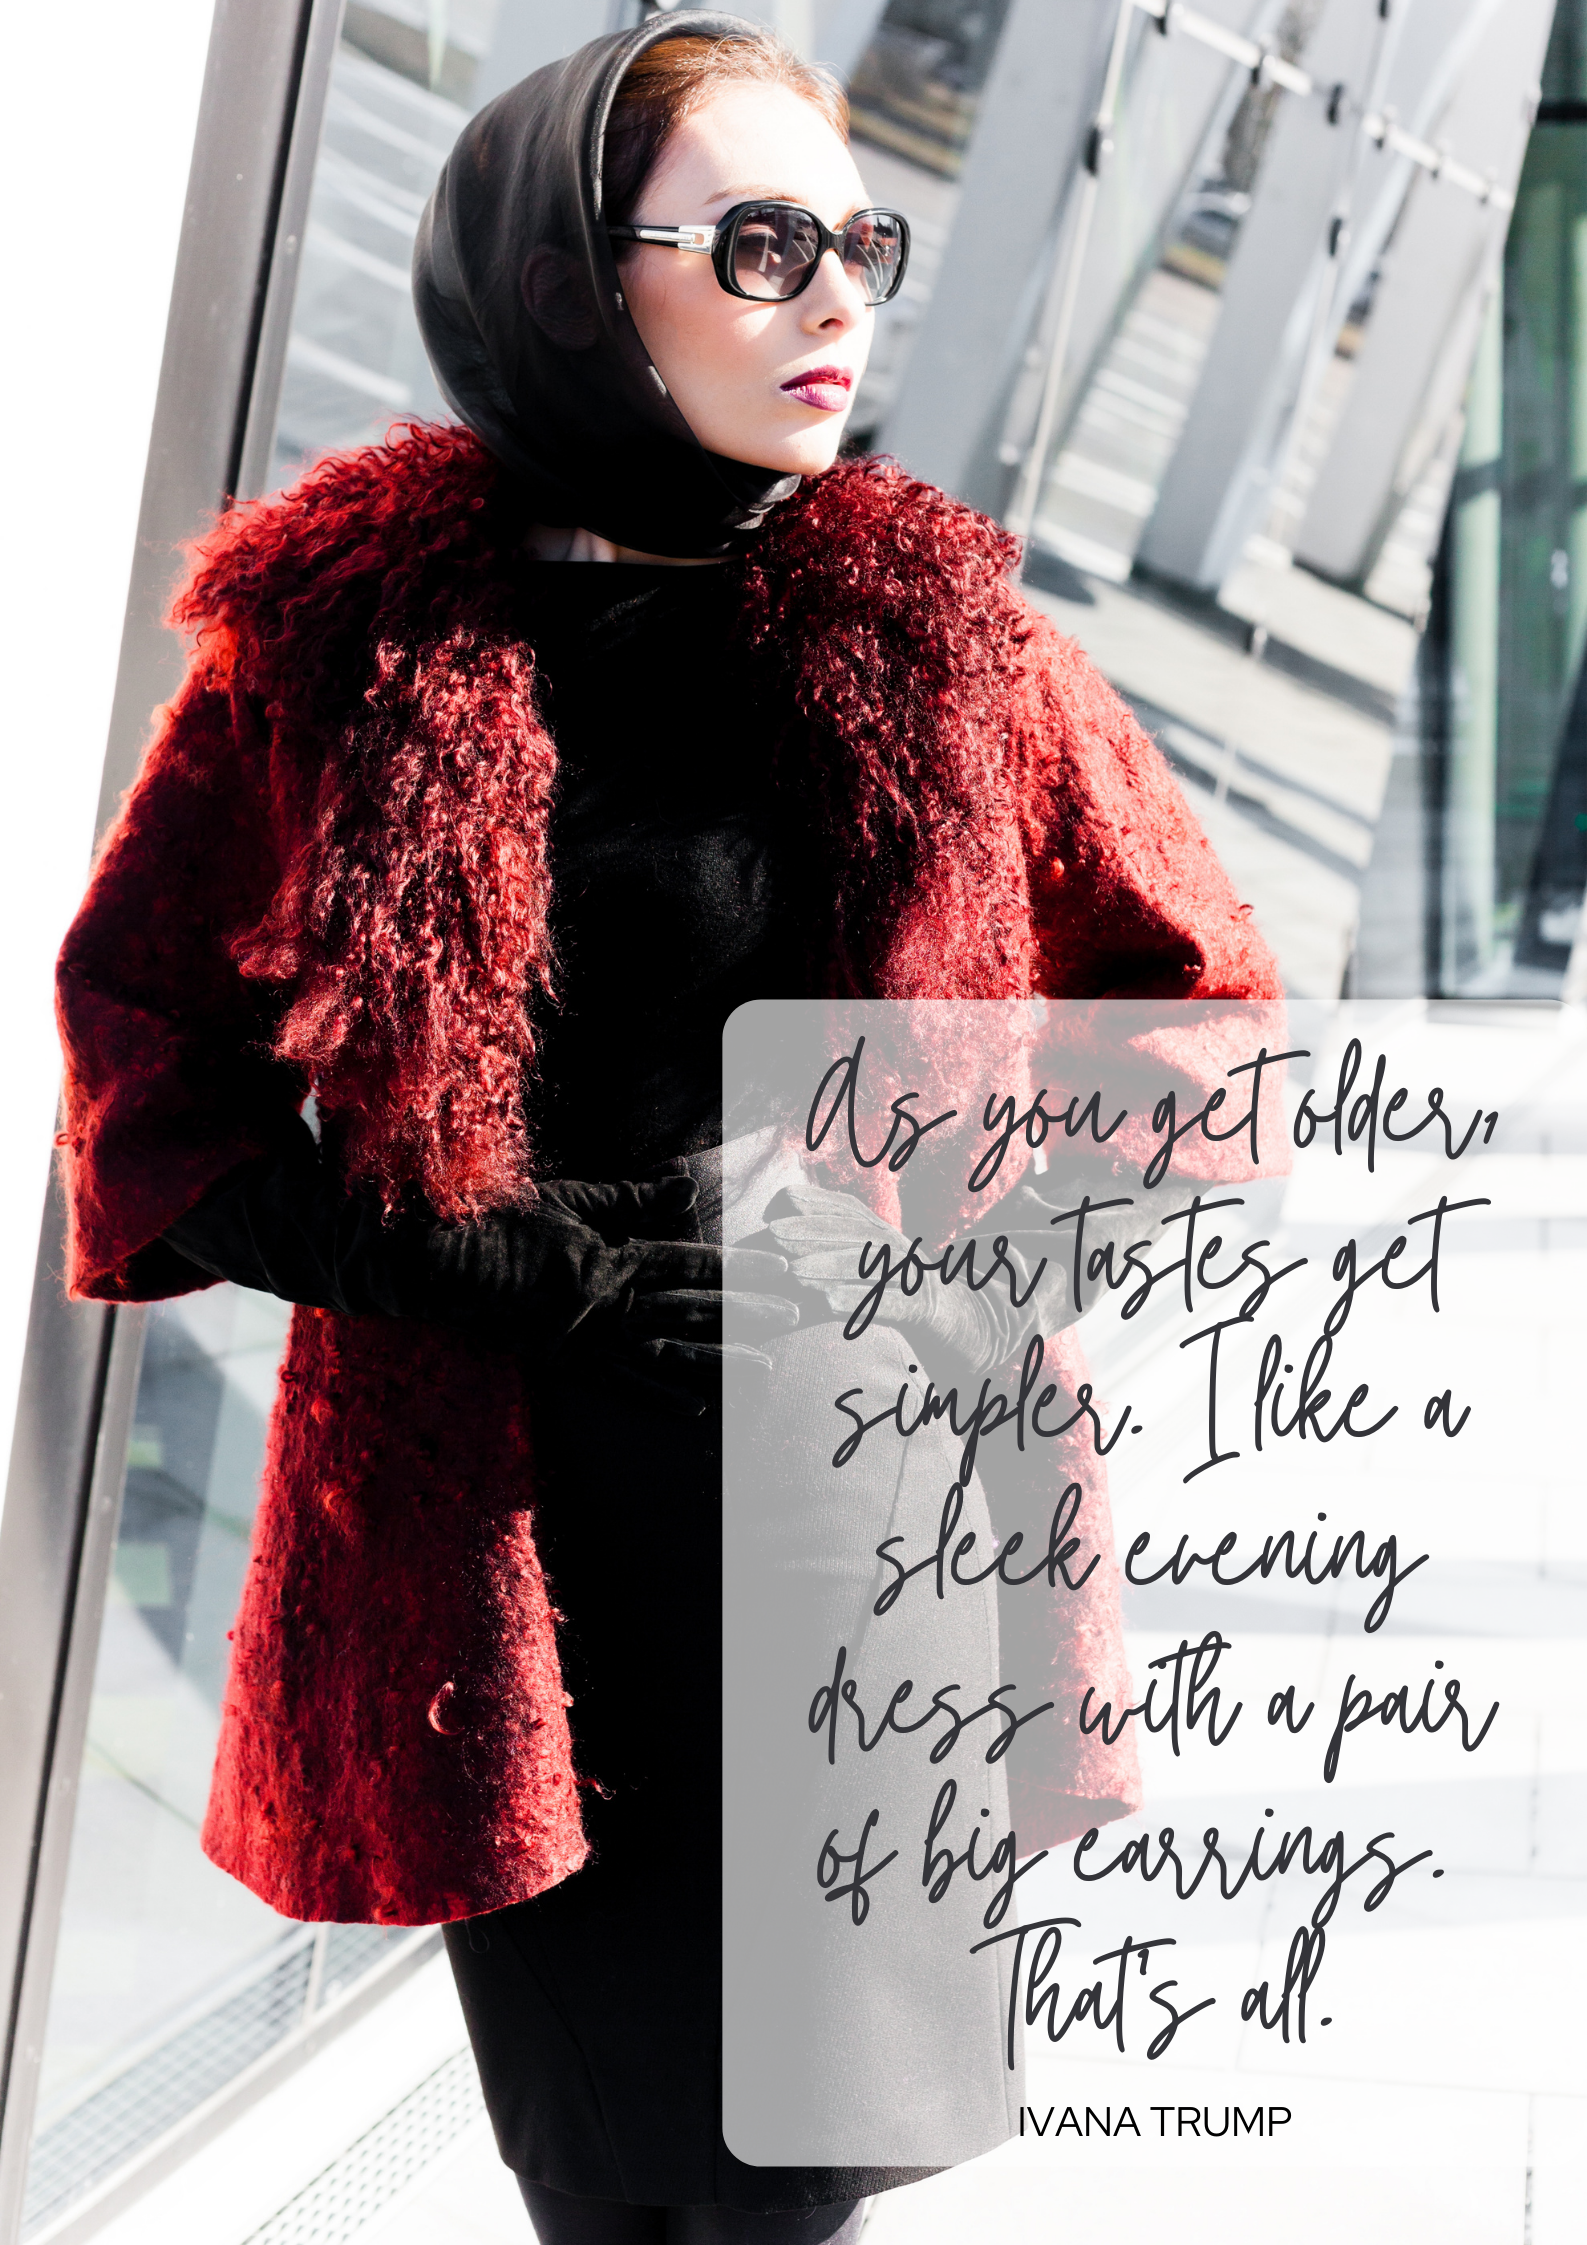 A woman walks down the street wearing a luxurious red fur coat, black head scarf, sunglasses, and gloves. Handwritten-style text over the image says, "As you get older, your tastes get simpler. I like a sleek evening dress with a pair of big earrings. That's all. - Ivana Trump"